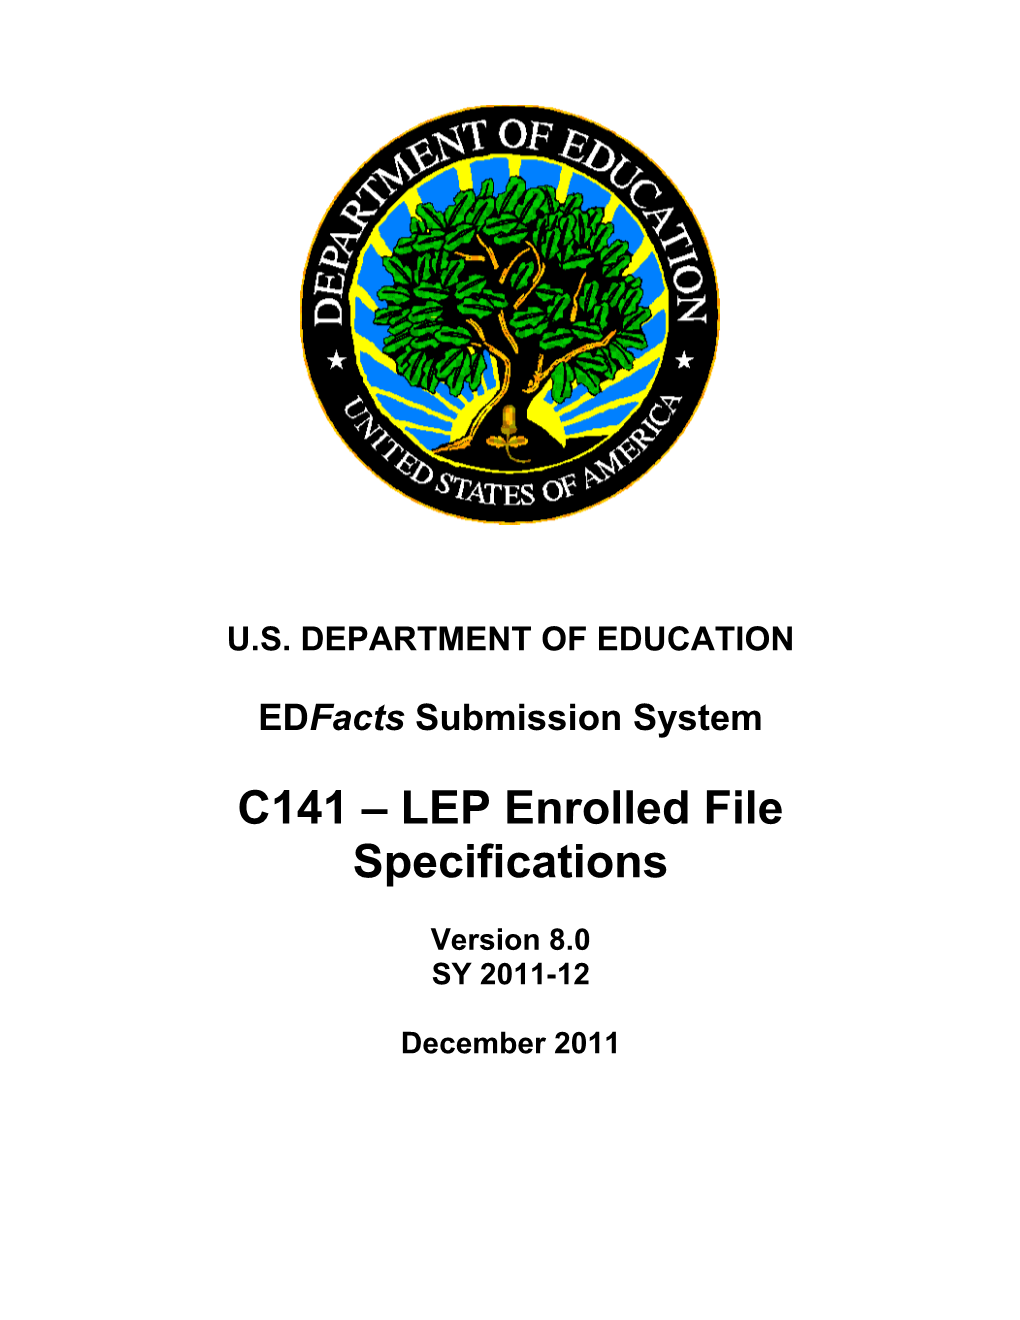 LEP Enrolled File Specifications